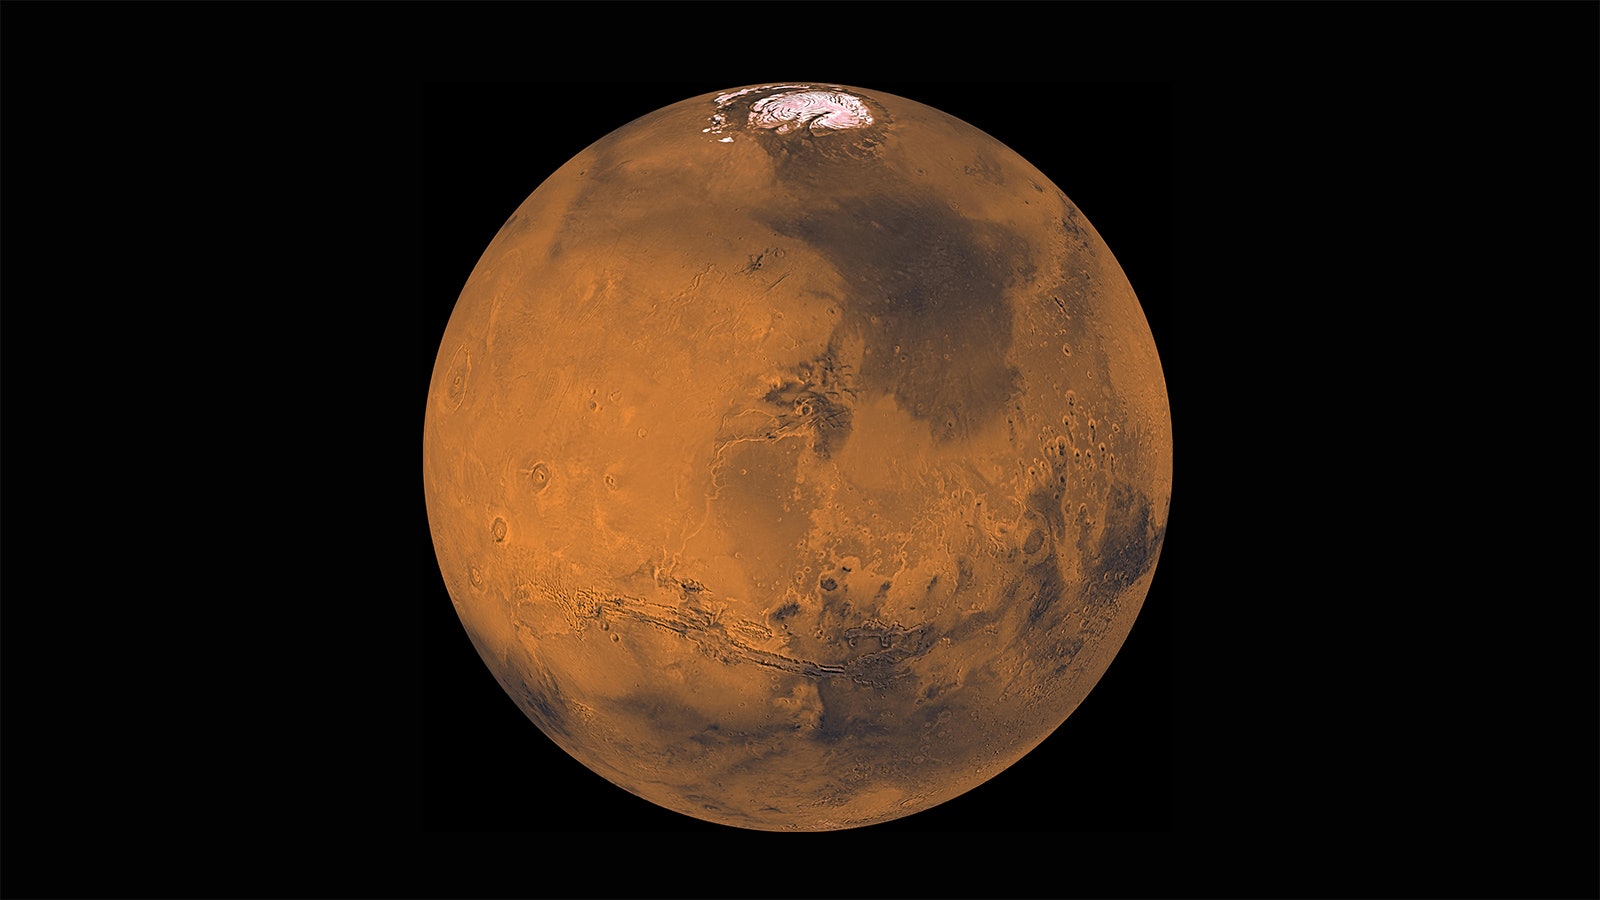 Mars 2020 Remarkable Maps Are Guiding The Mission Icoreign Com - augustus julius caesar roblox